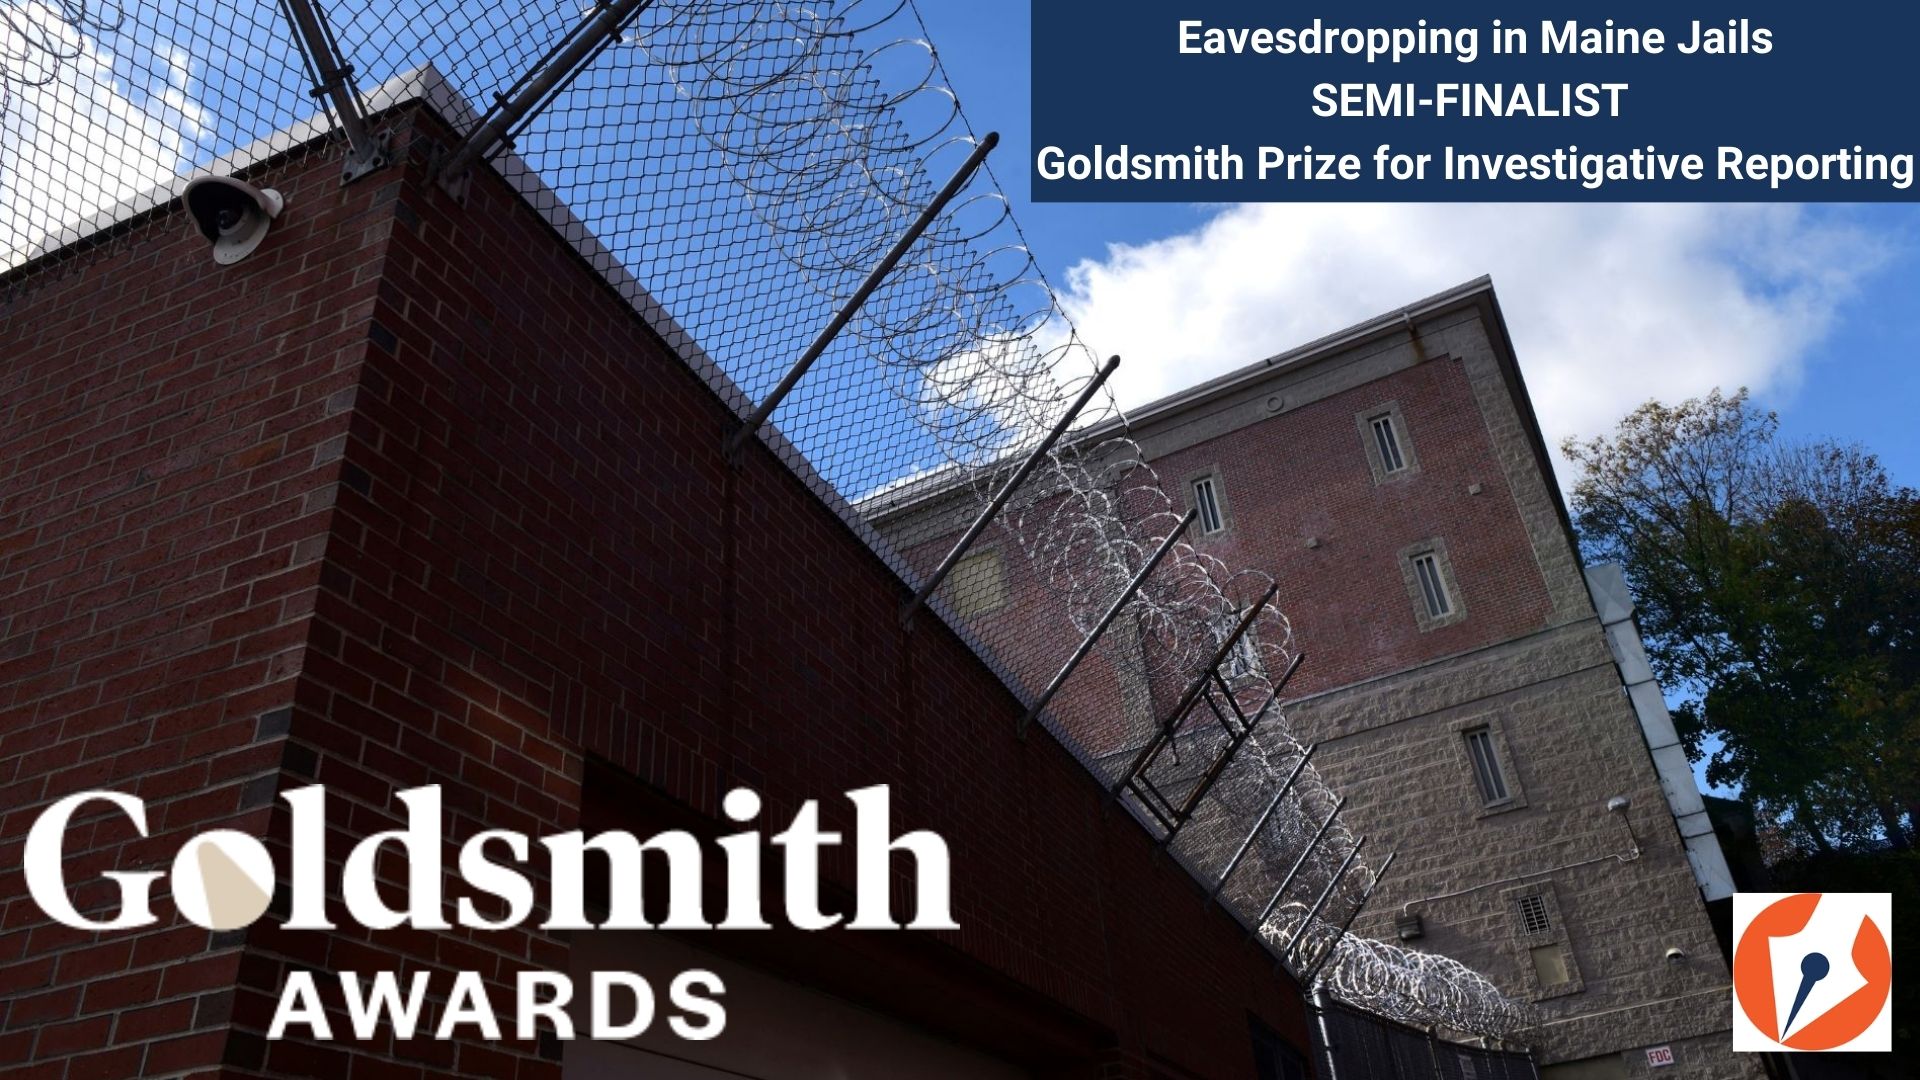 ‘Eavesdropping’ series a semi-finalist for Goldsmith Prize